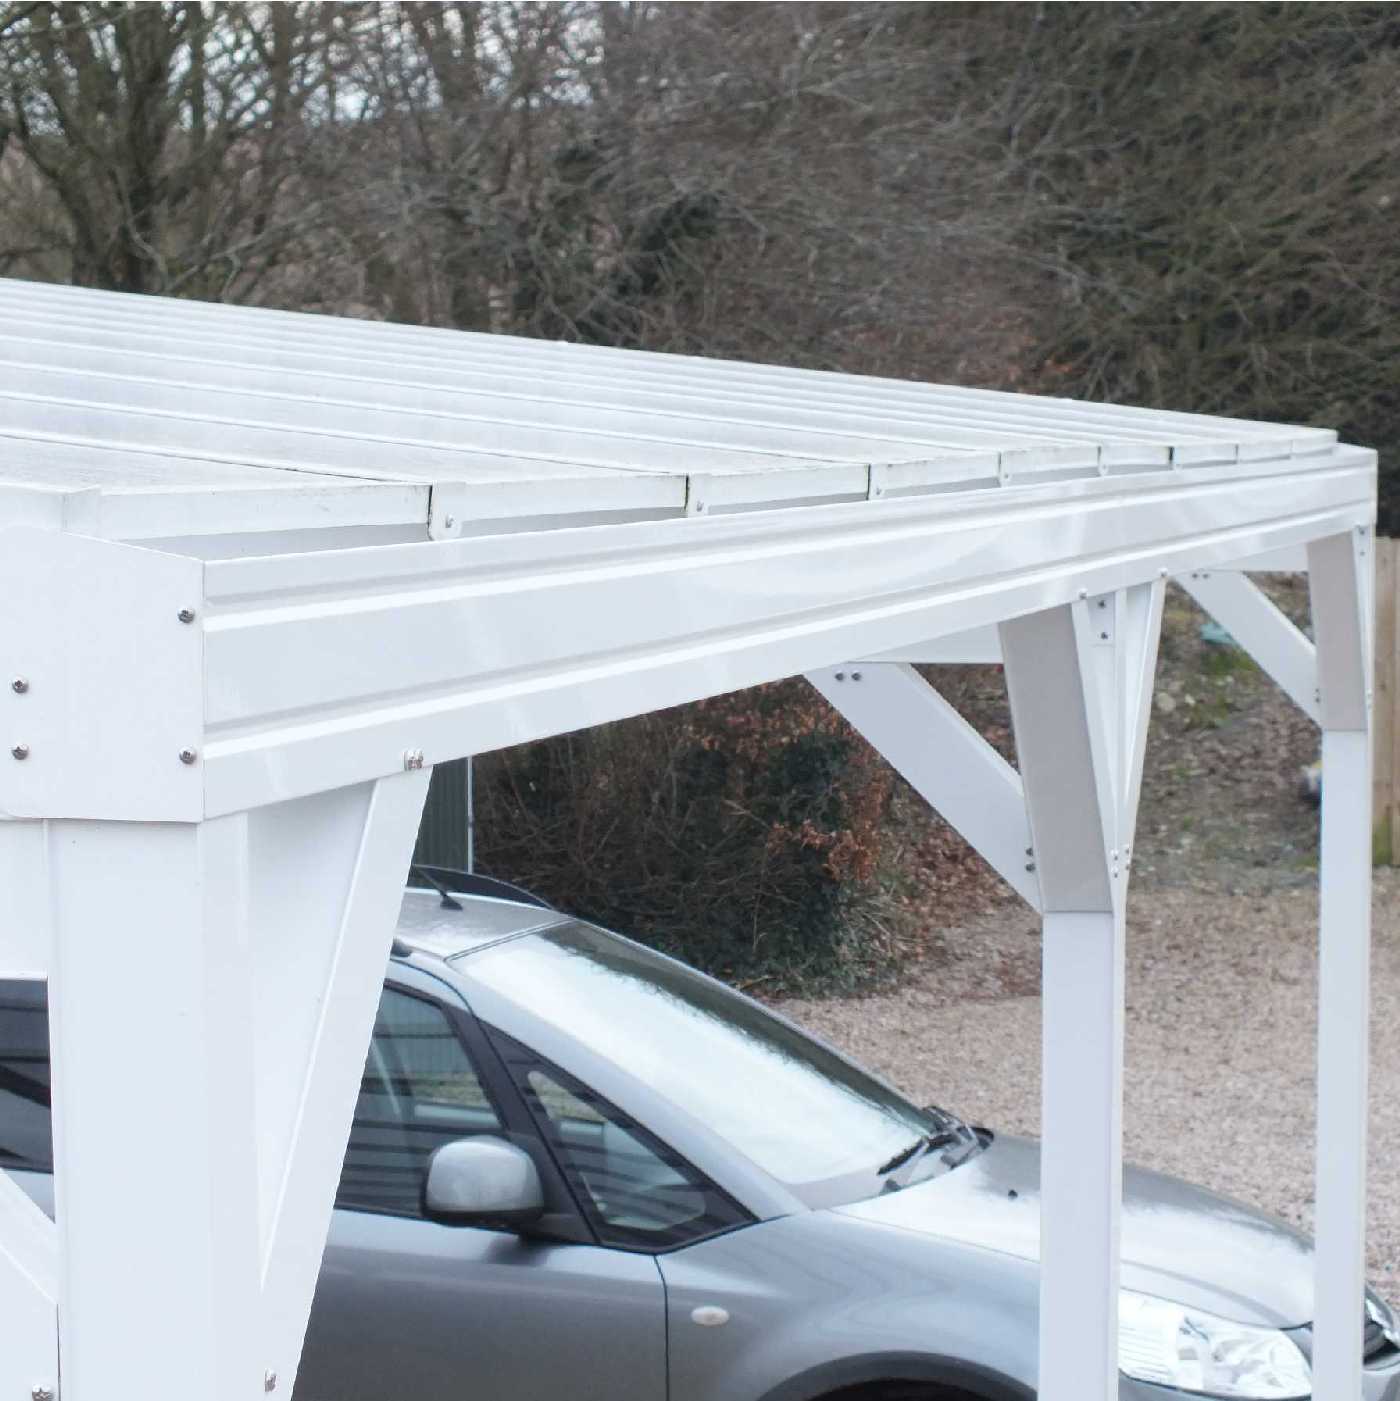 Omega Smart Free-Standing, White MonoPitch Roof Canopy with 6mm Glass Clear Plate Polycarbonate Glazing - 2.8m (W) x 2.0m (P), (4) Supporting Posts from Omega Build